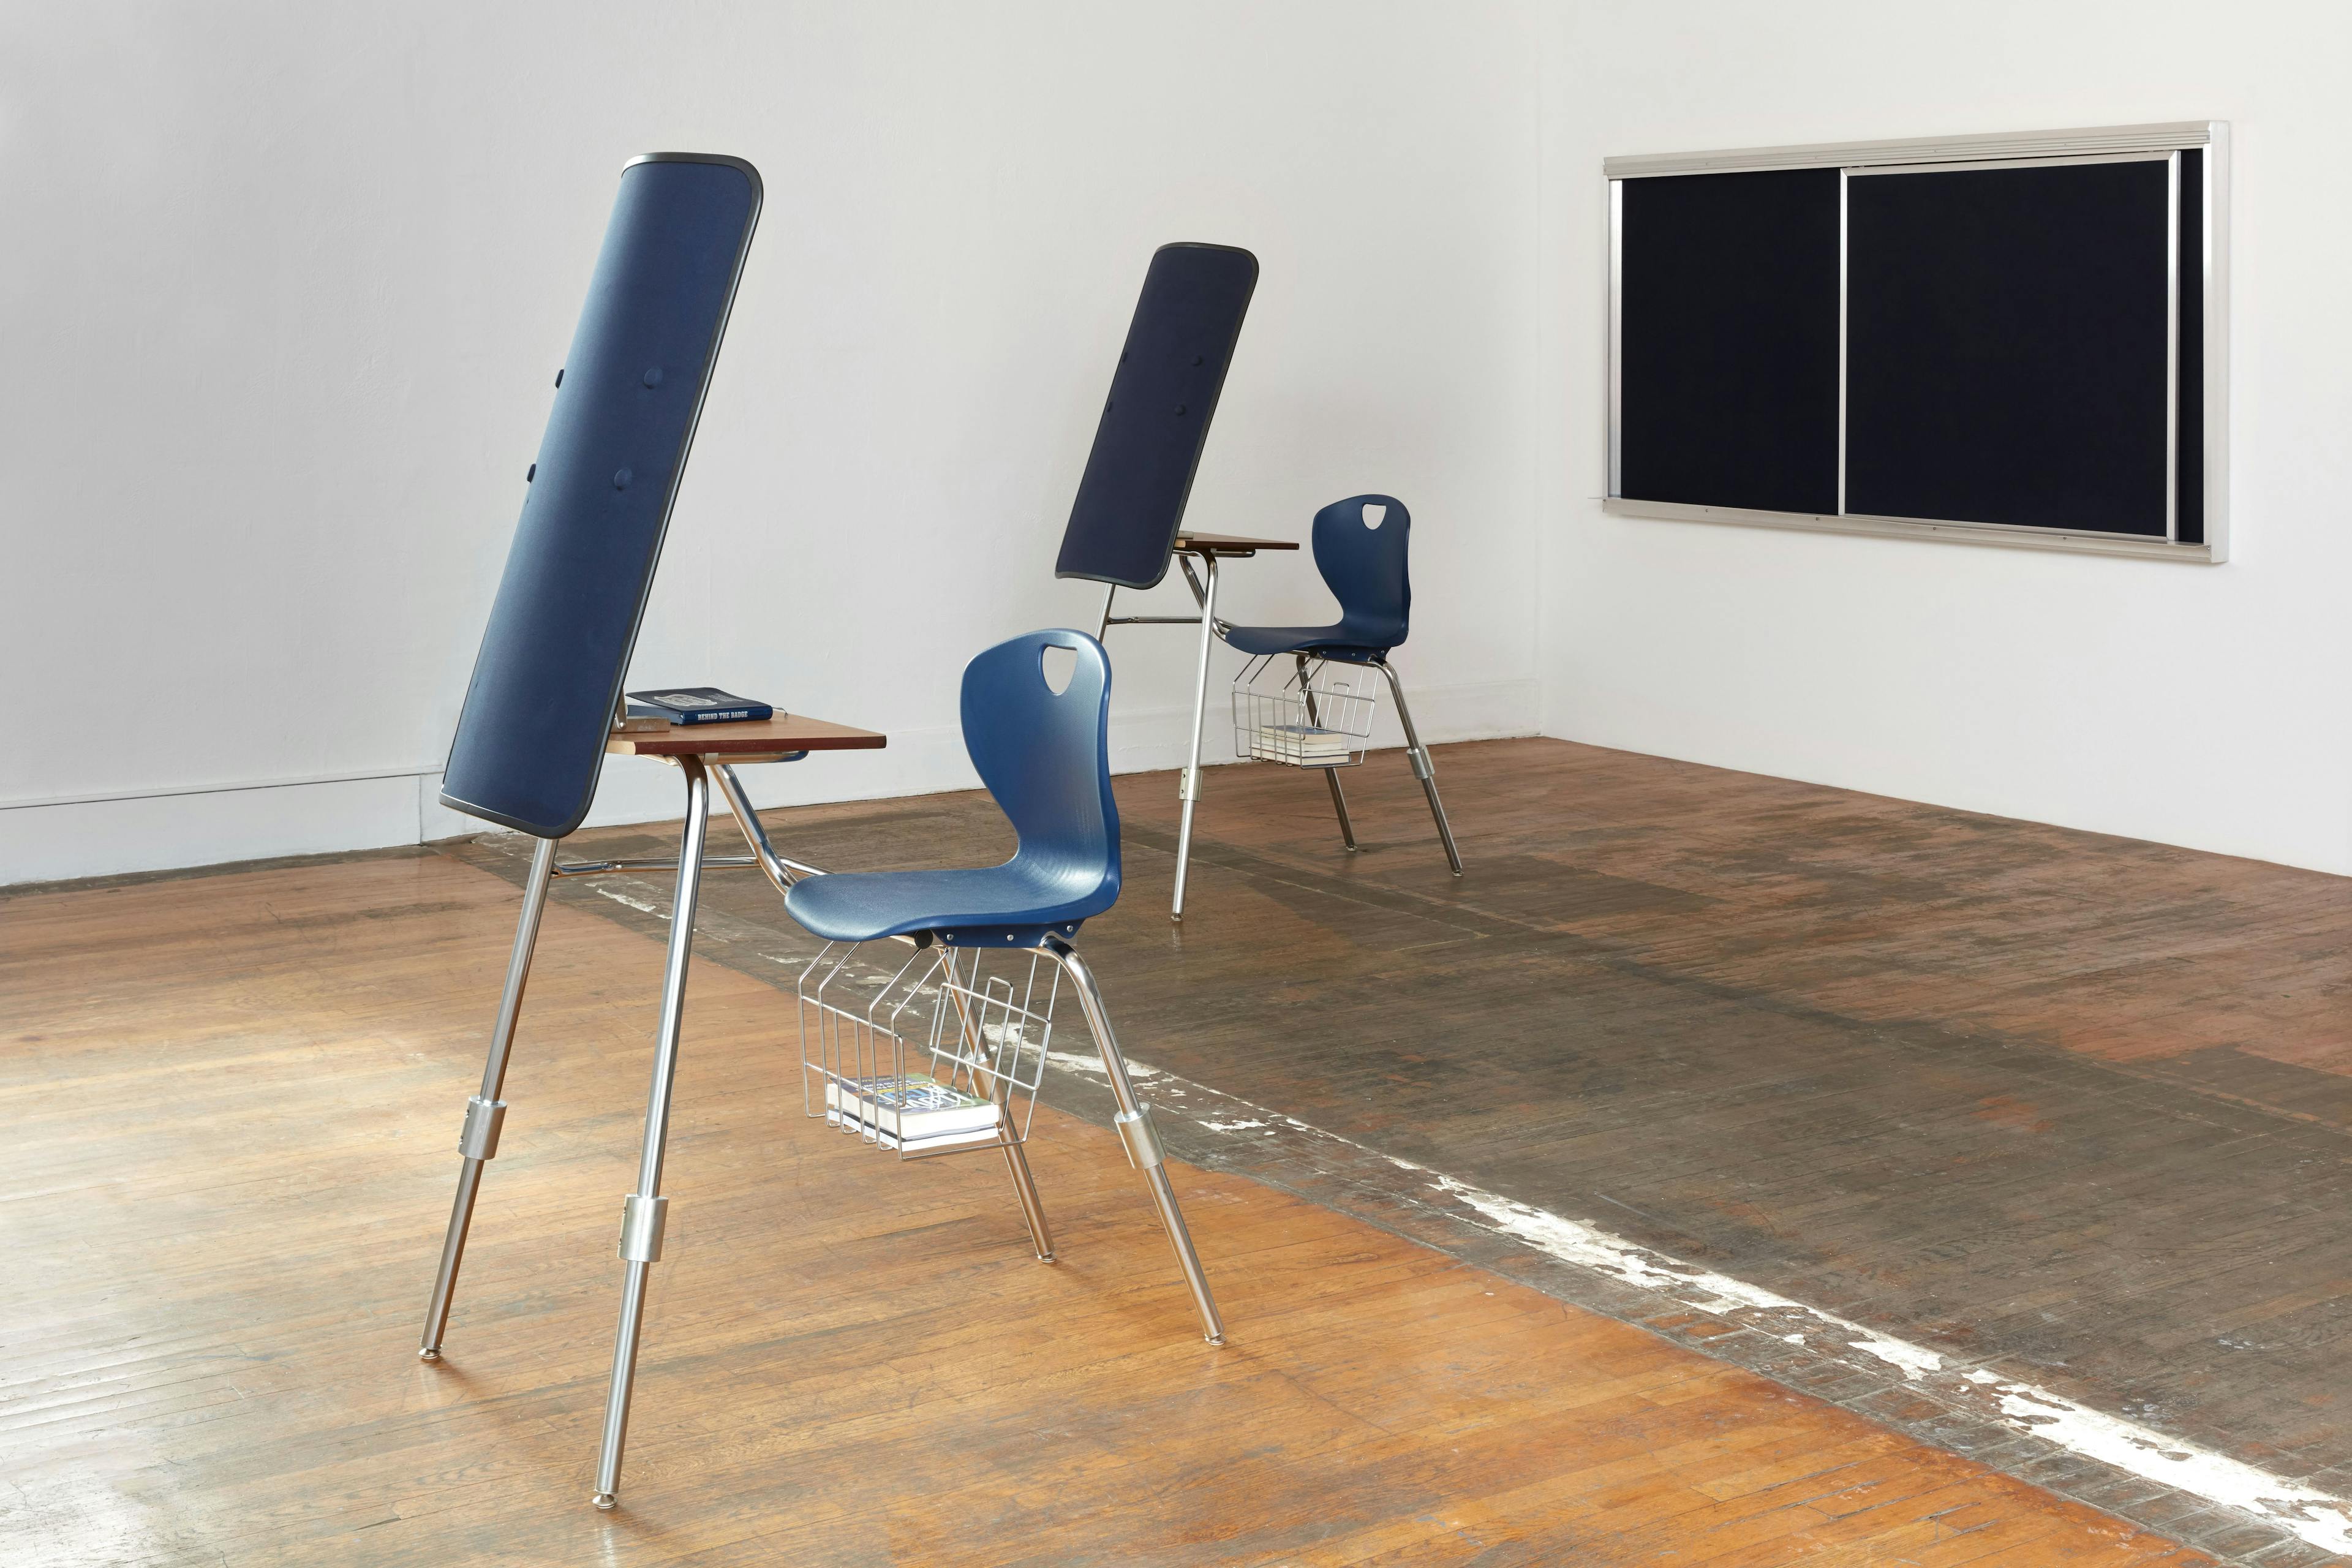 Two navy and wooden school desks, each modified to include a ballistic shield attached to the front, sit in a spacious white room with wooden floors. On the back wall is an empty chalkboard, and a small stack of books hangs below each desk.